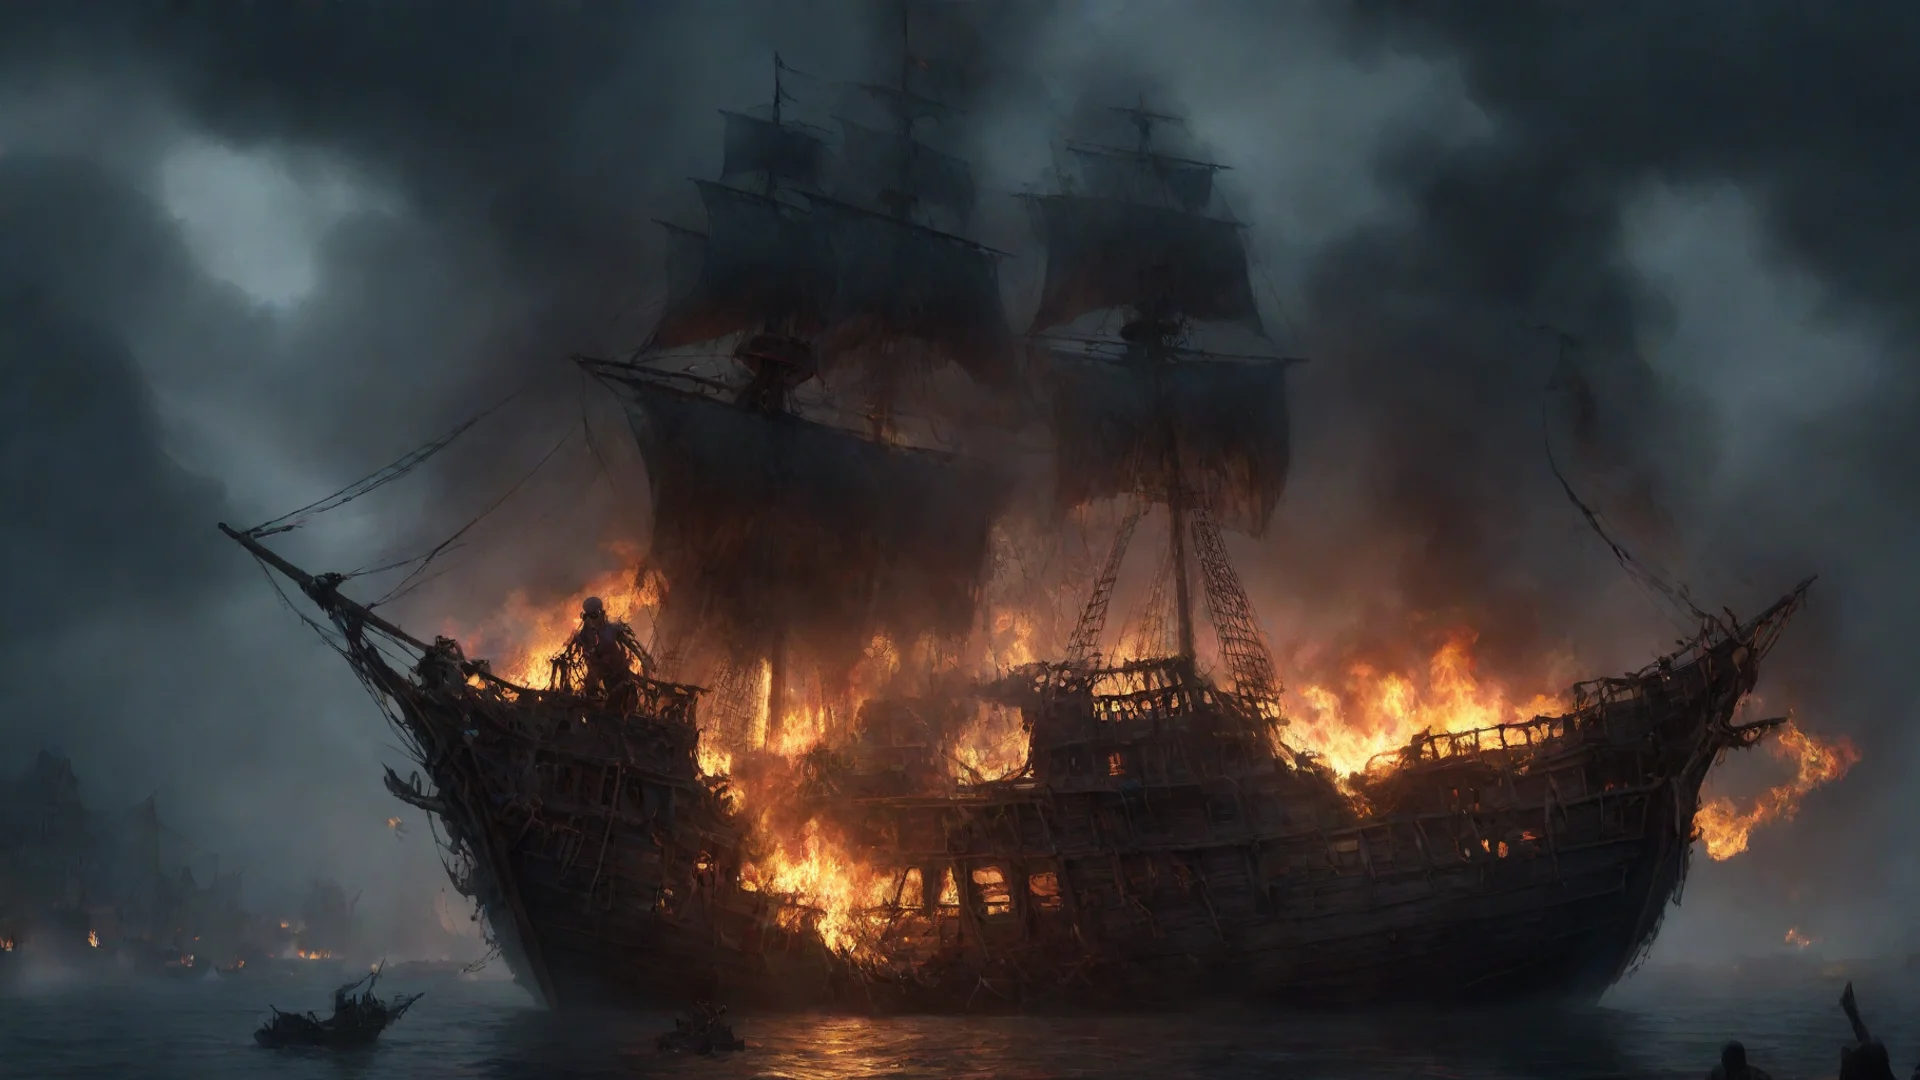 aiamazing burning pirate ship concept art dark smoldering skeletons awesome portrait 2 wide